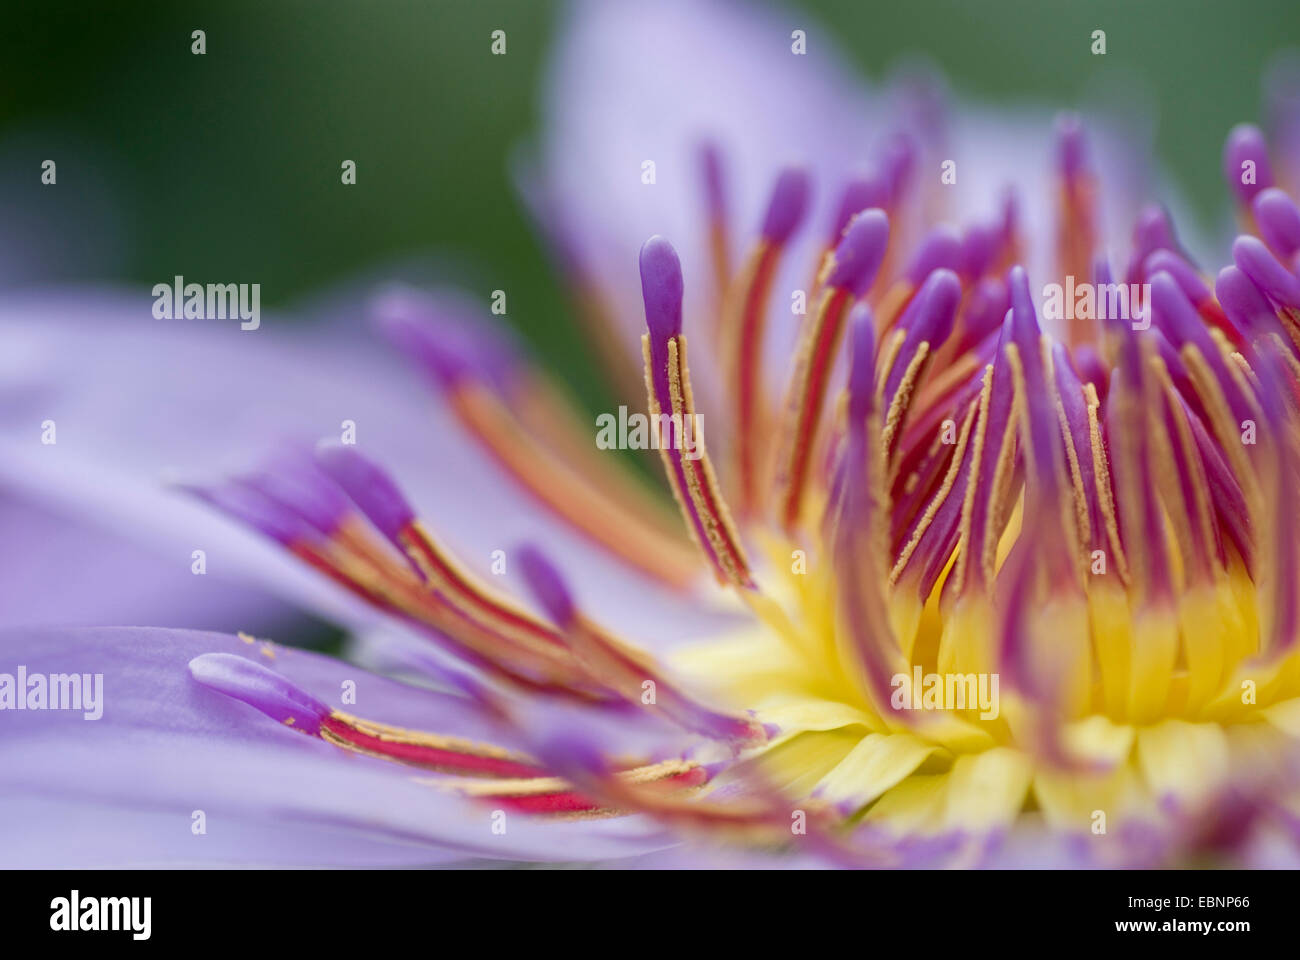 Tropical waterlily, Blue Pigmy (Nymphaea colorata), detail of a flower, stamina Stock Photo